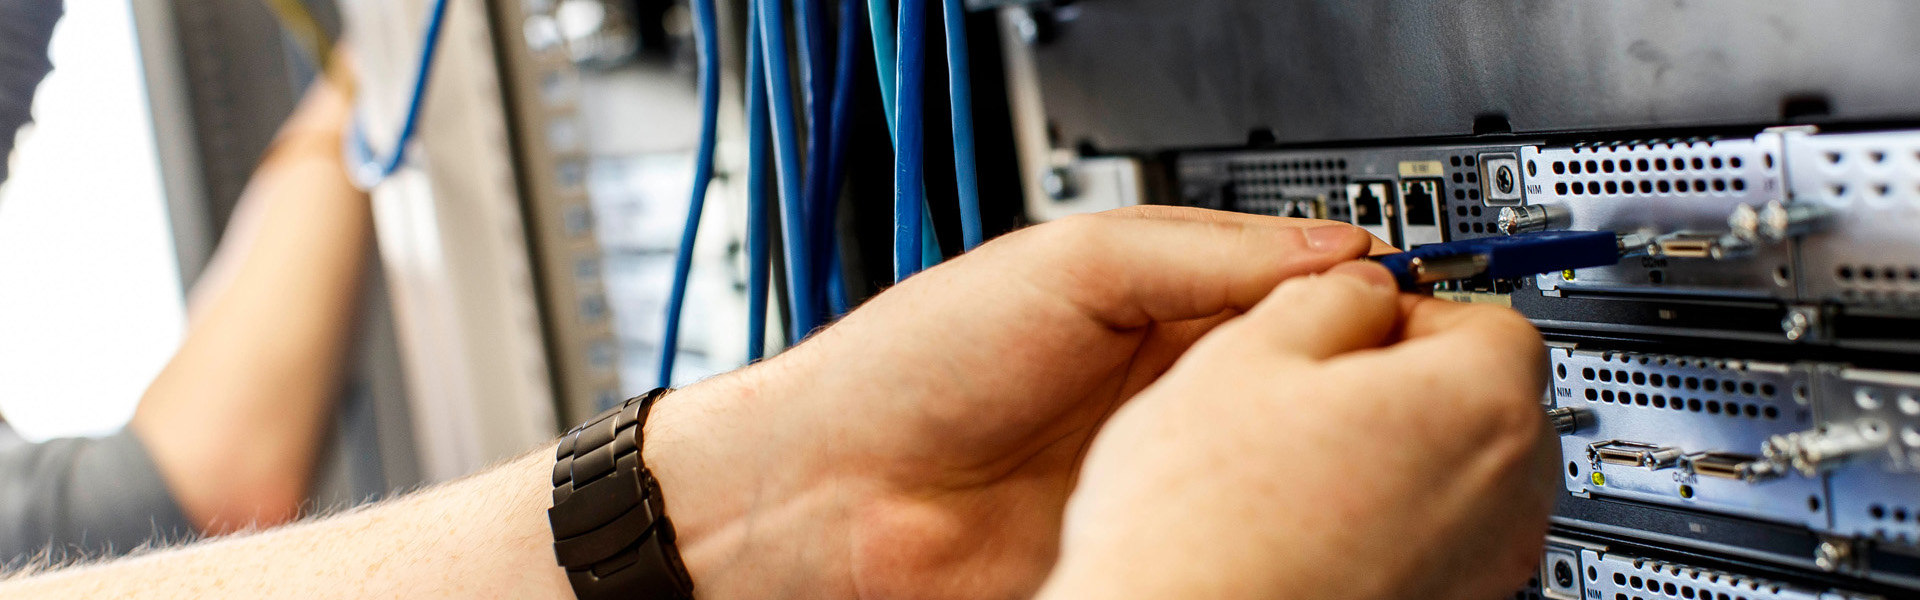 A technician connecting blue network cabling into a server.